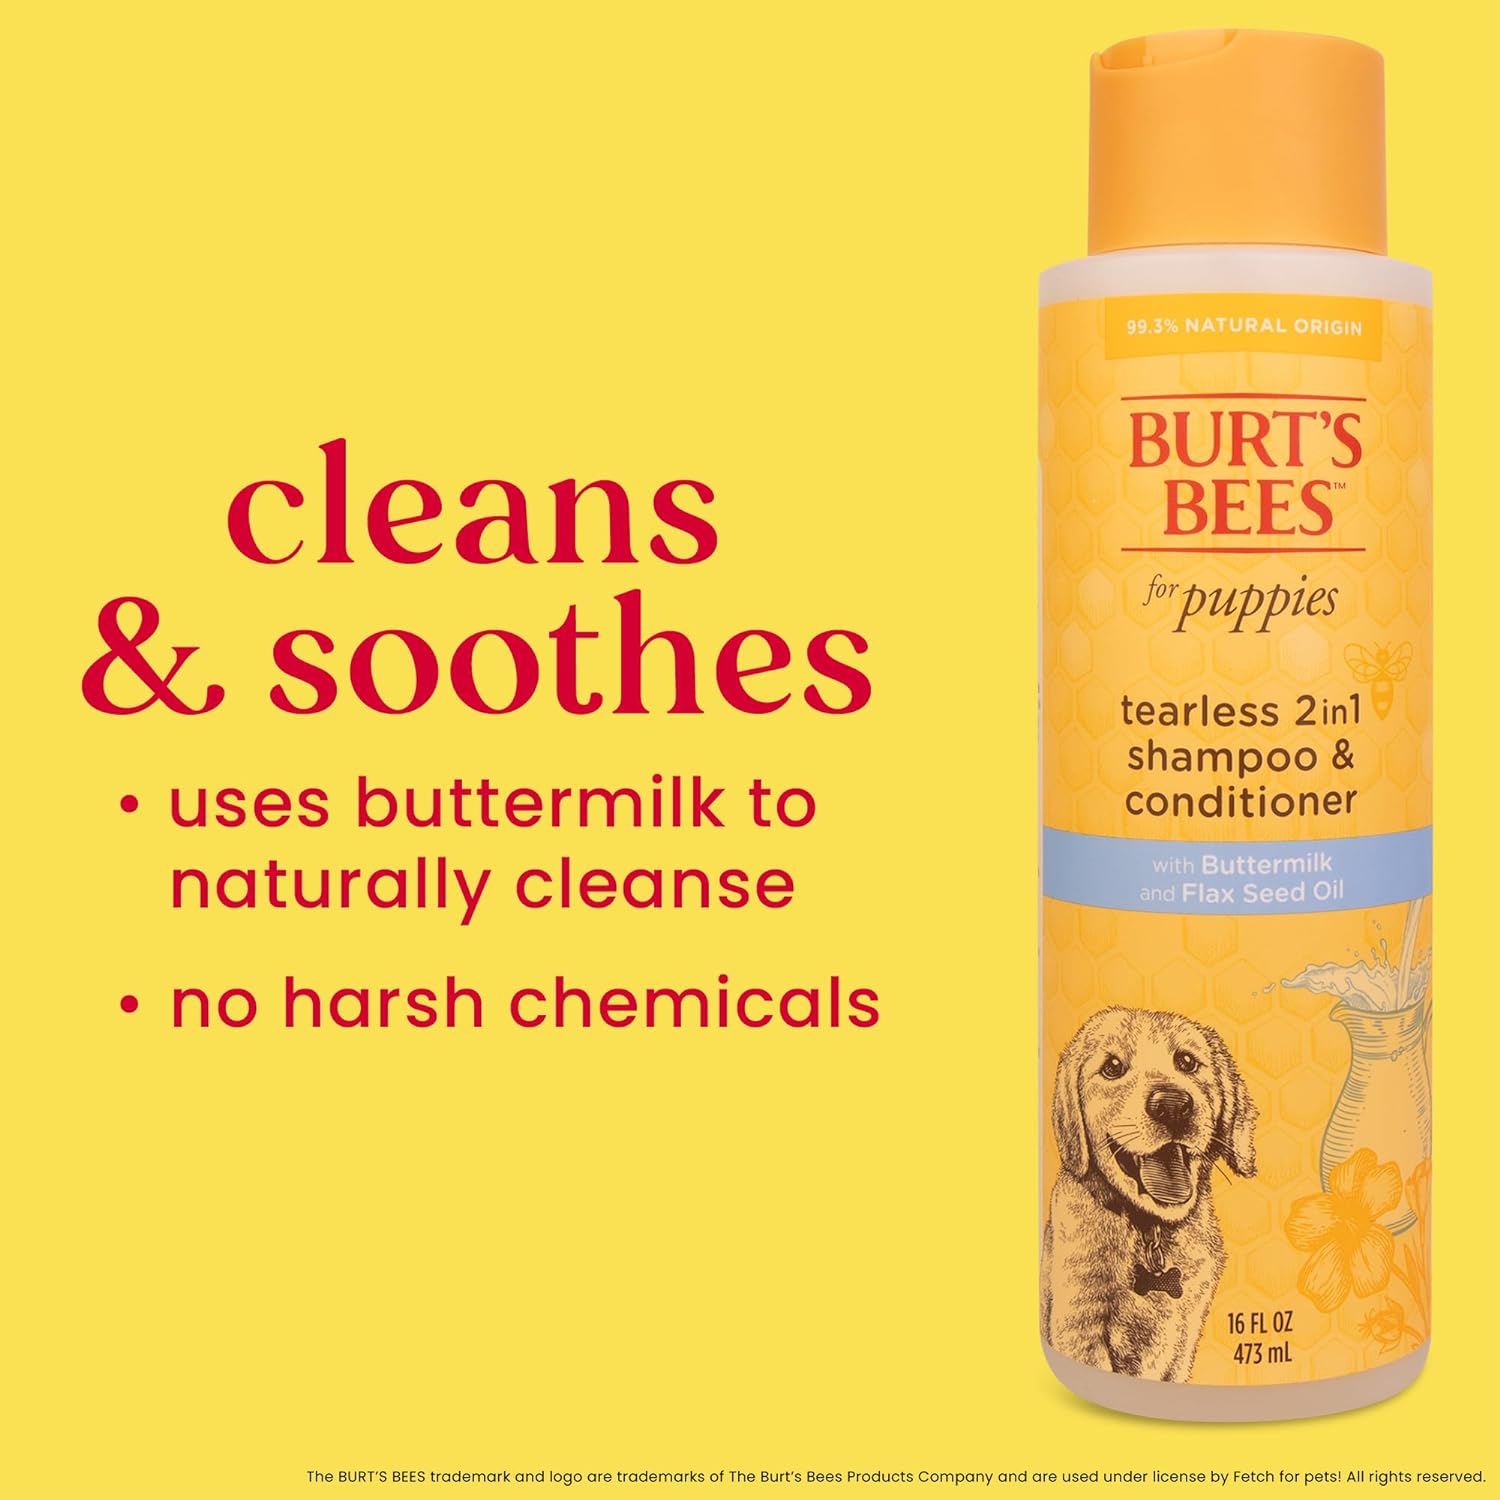 Burt's Bees for Pets Puppies Natural Tearless 2 in 1 Shampoo and Conditioner - Made with Buttermilk and Flax Seed Oil - Best Tearless Puppy Shampoo for Gentle Skin and Coat - Made in USA, 16 Oz : Everything Else